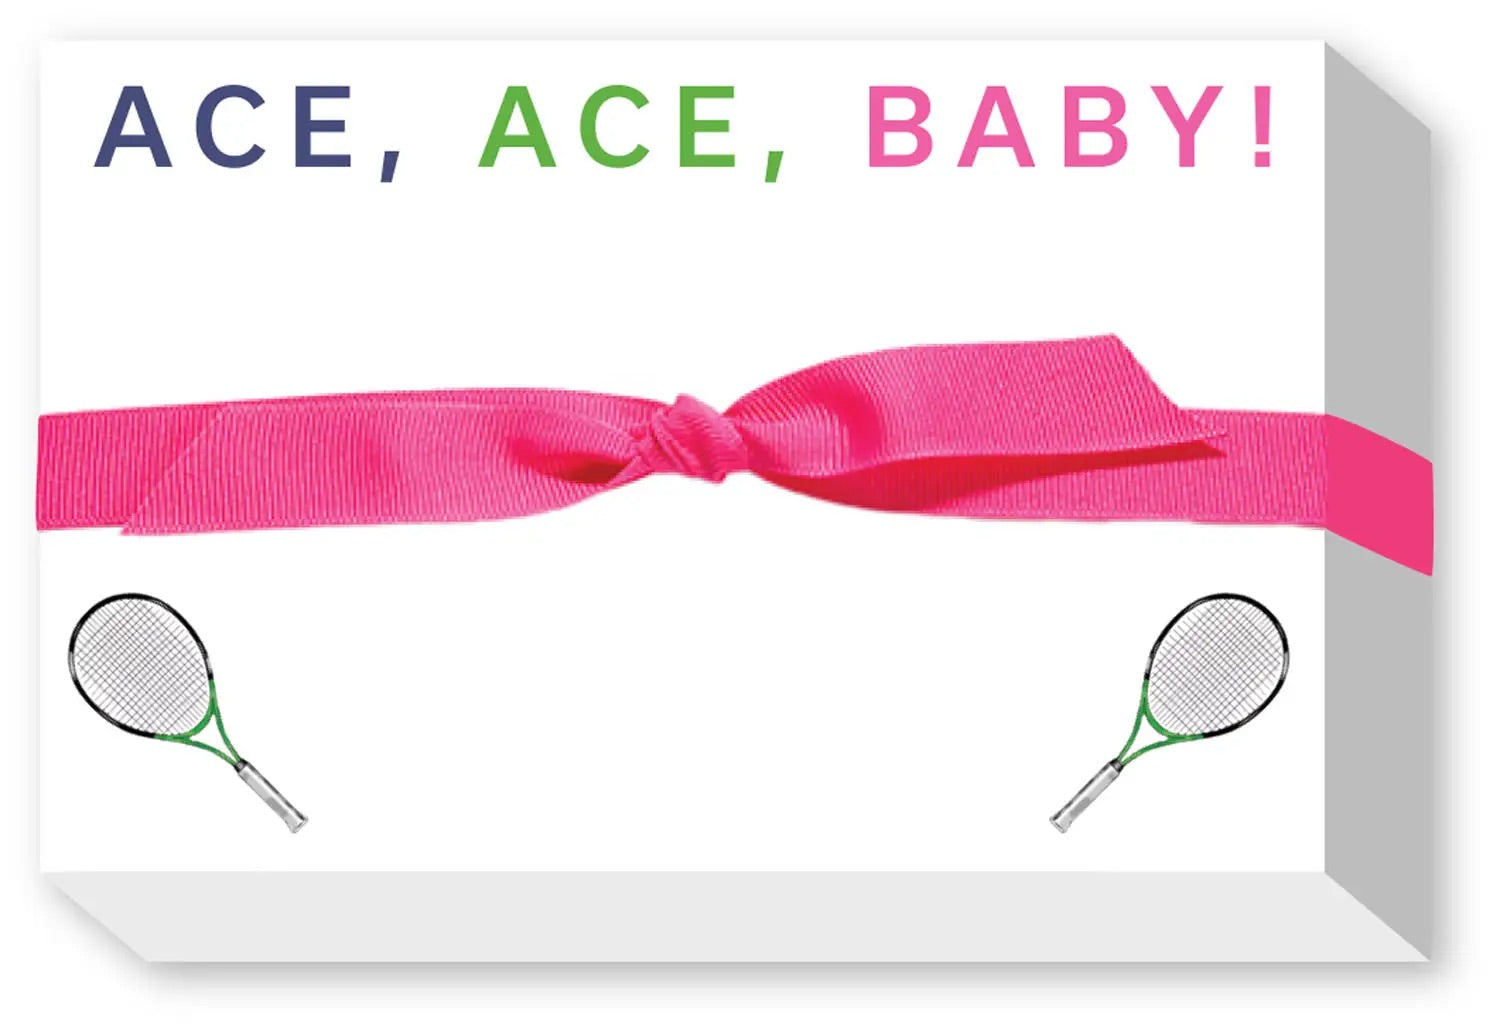 Ace Ace Baby Chubbie Notepad